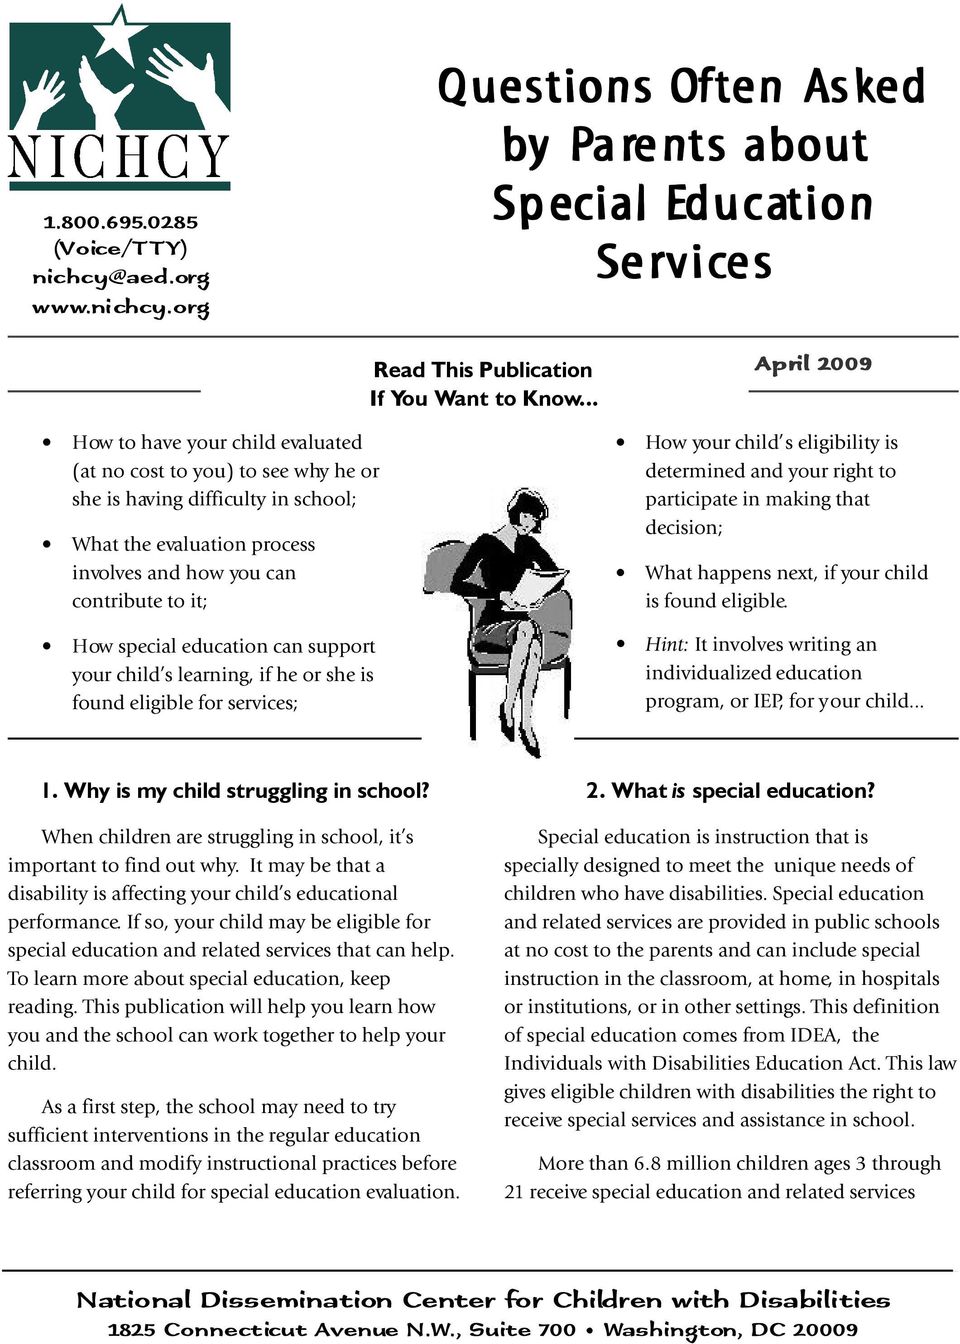 org Q uestions Often Ask sked by y Par aren ents about Spe pecial Educa ducation Ser ervic vices How to have your child evaluated (at no cost to you) to see why he or she is having difficulty in